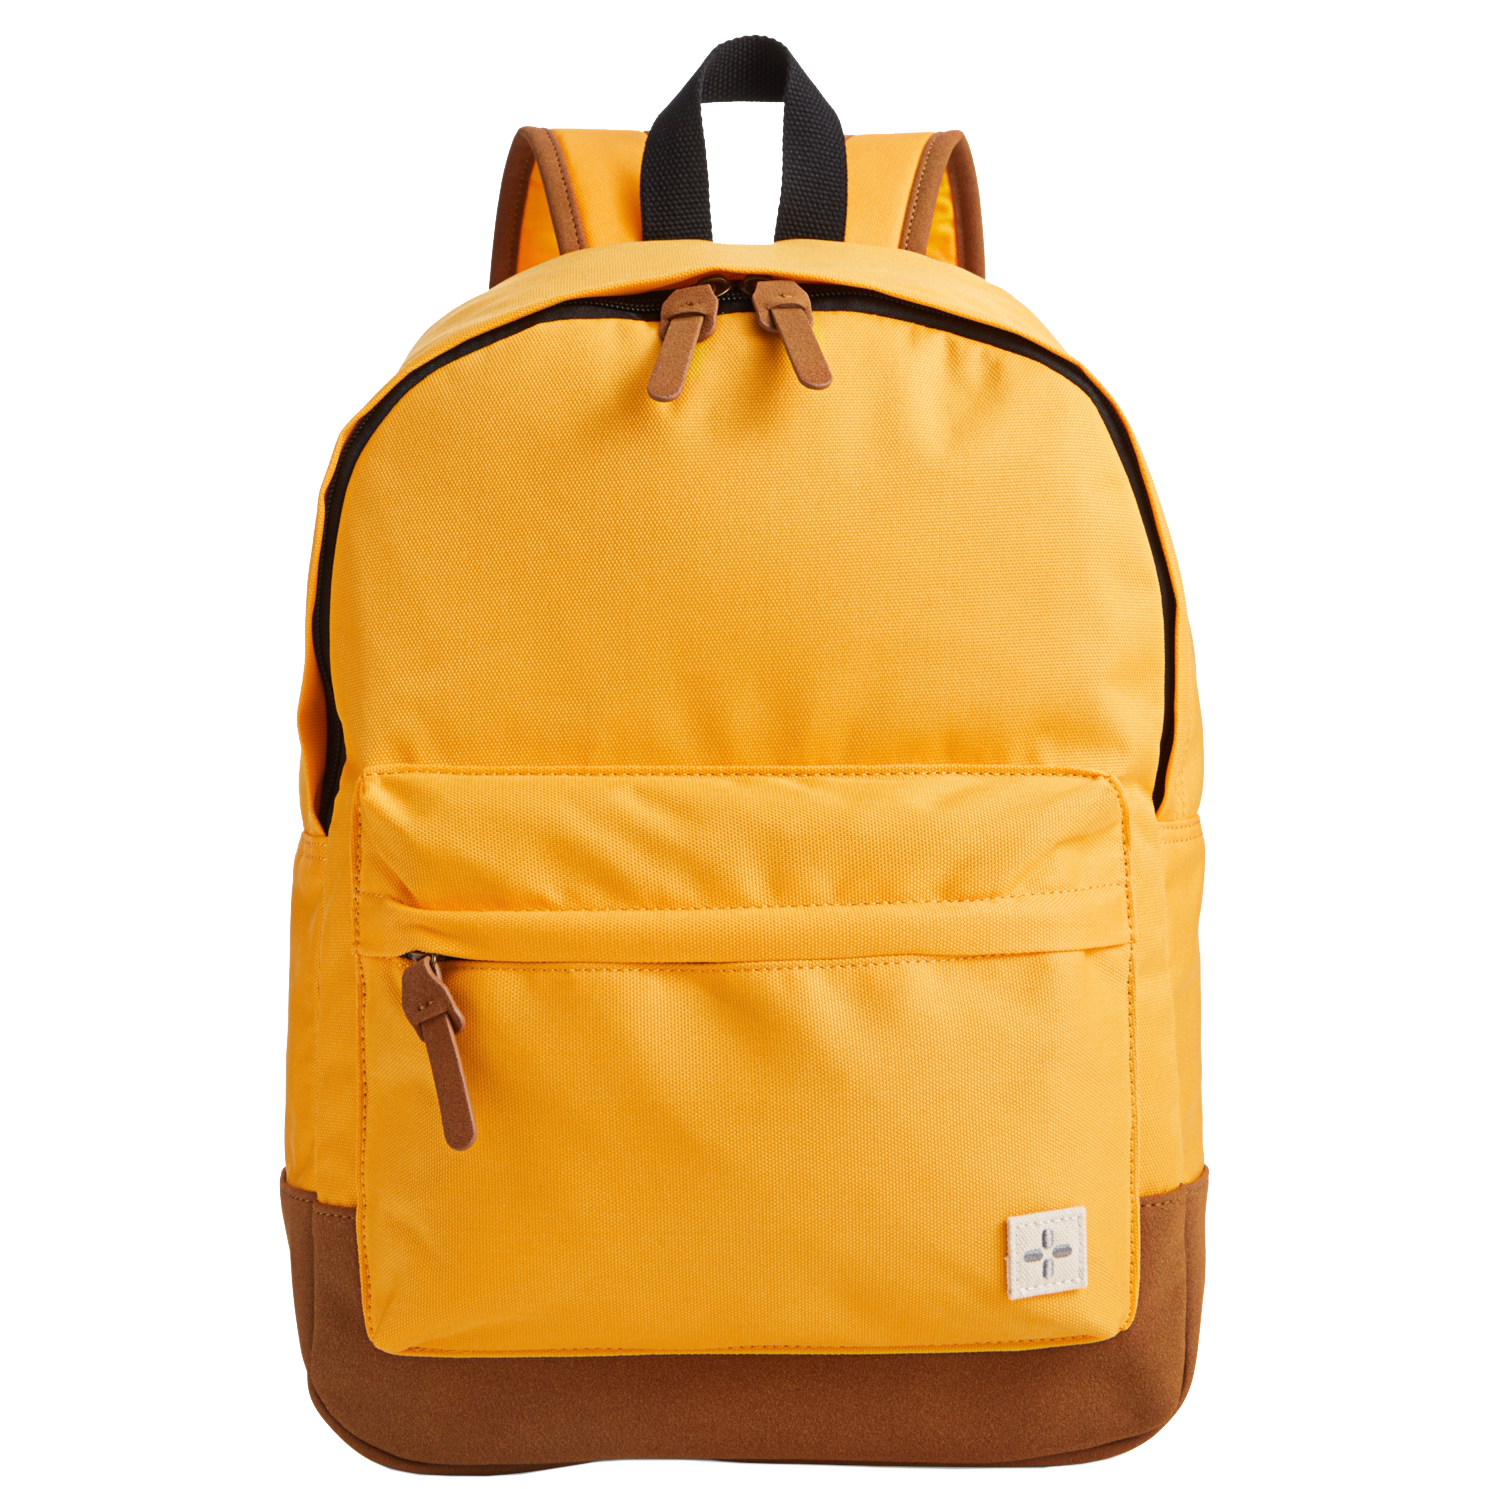 Polo Ralph Lauren Canvas Backpack Back To School Adult Child Bookbag Yellow  $95